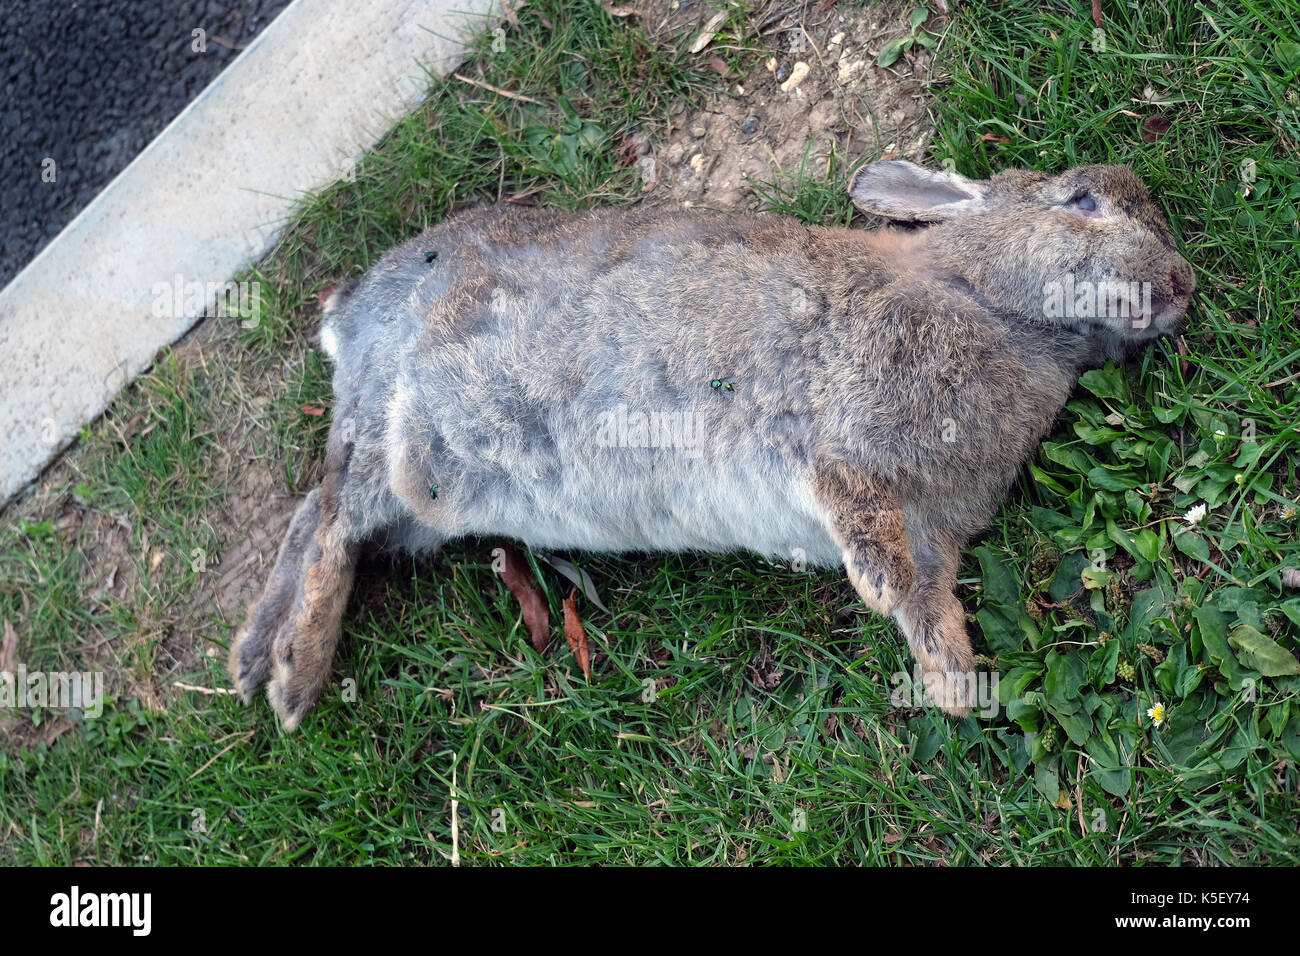 Dead rabbit at the roadside having been hit by vehicle. Roadkill. Stock Photo